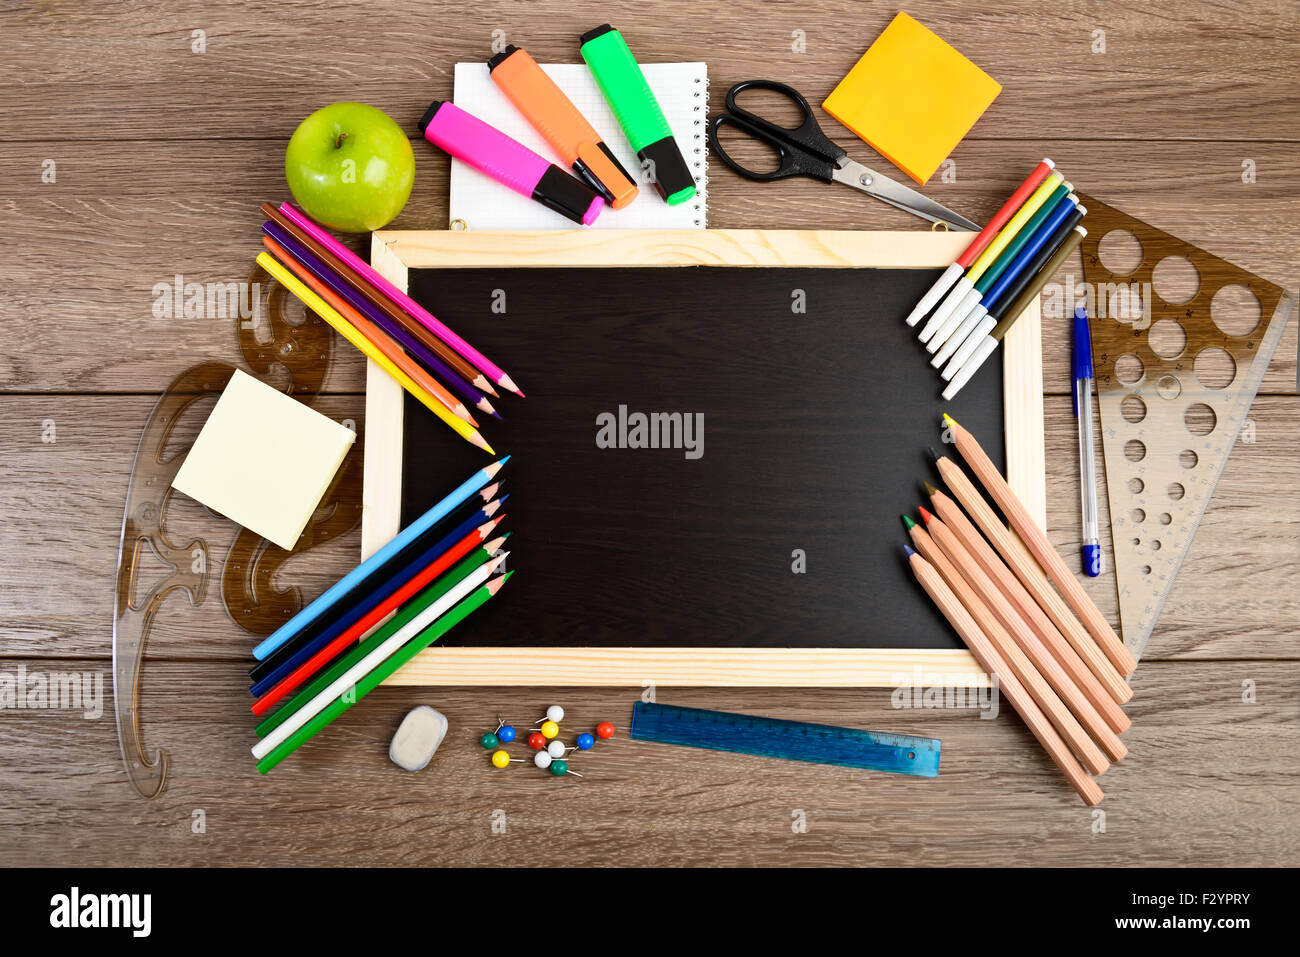 School supplies on blackboard background ready for your design Stock Photo